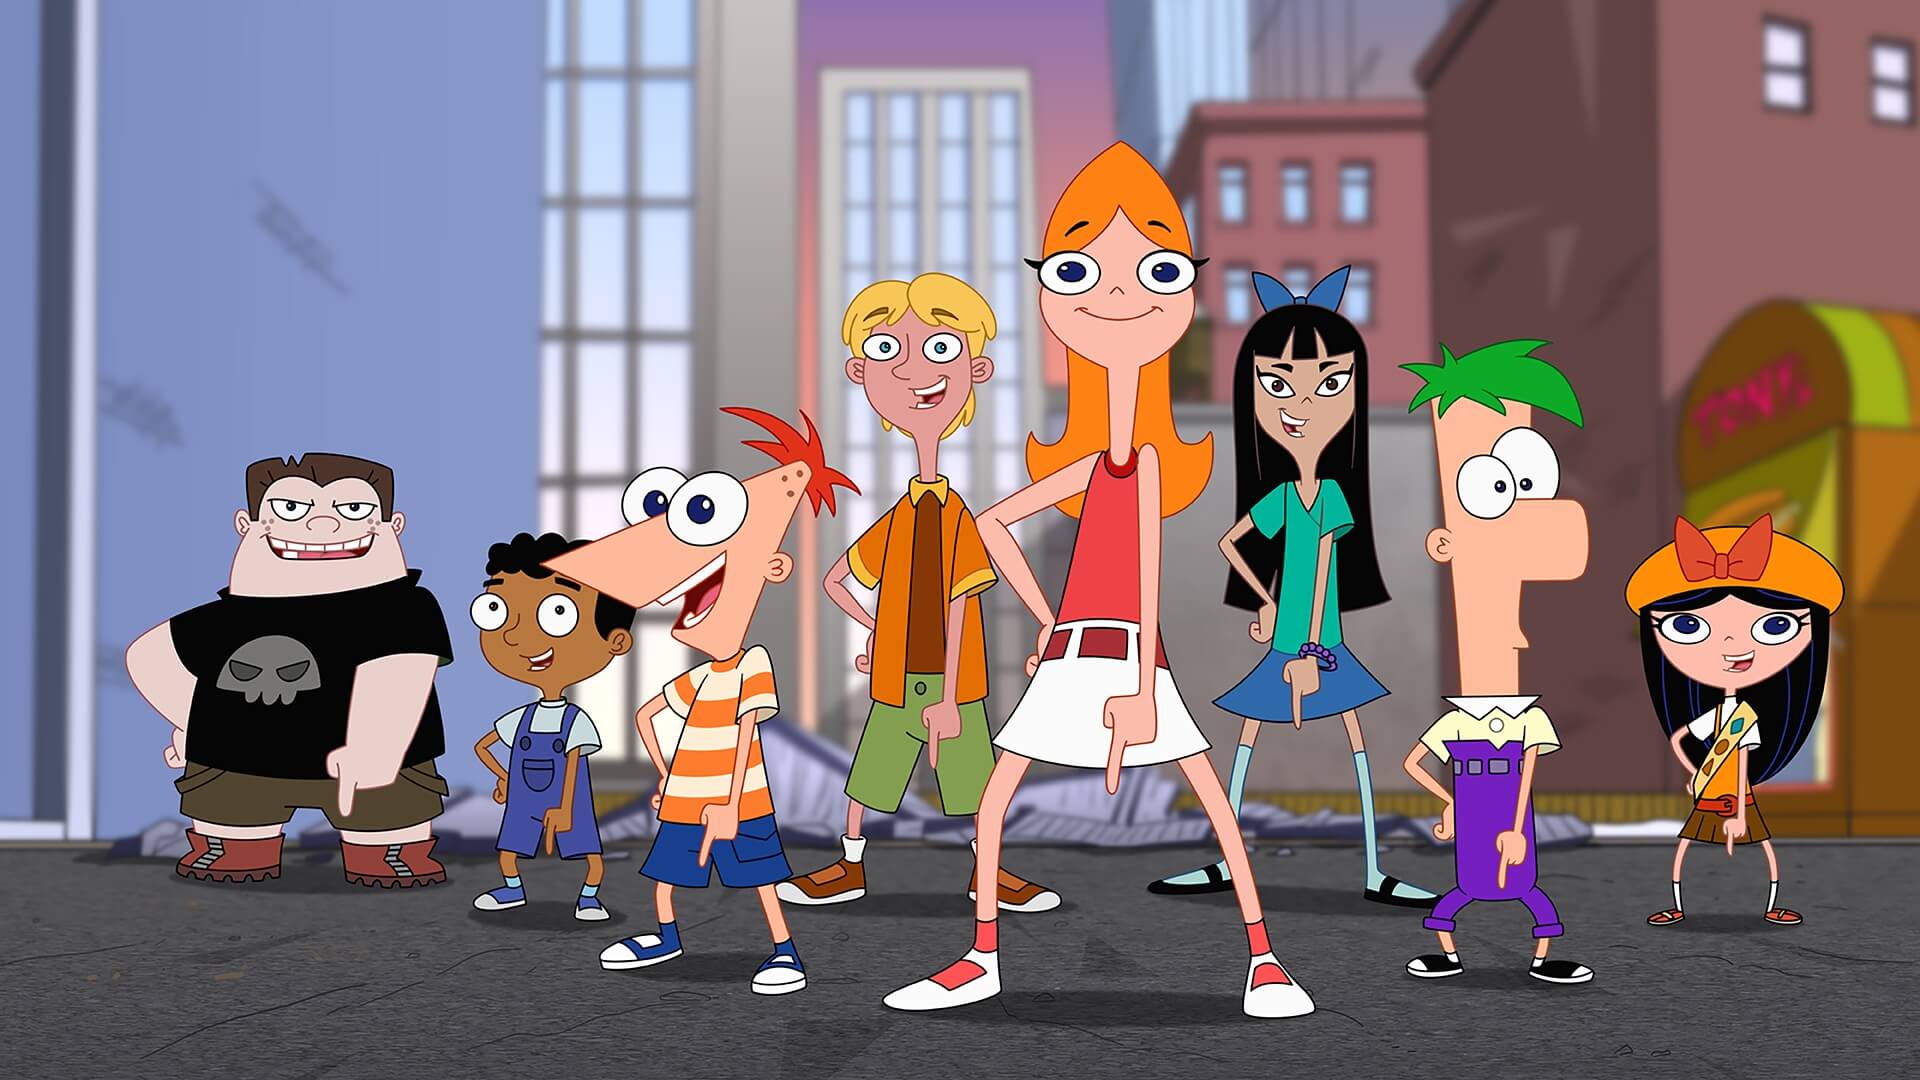 Sneak Peek For Disney+ Film 'Phineas and Ferb The Movie: Candace Again...